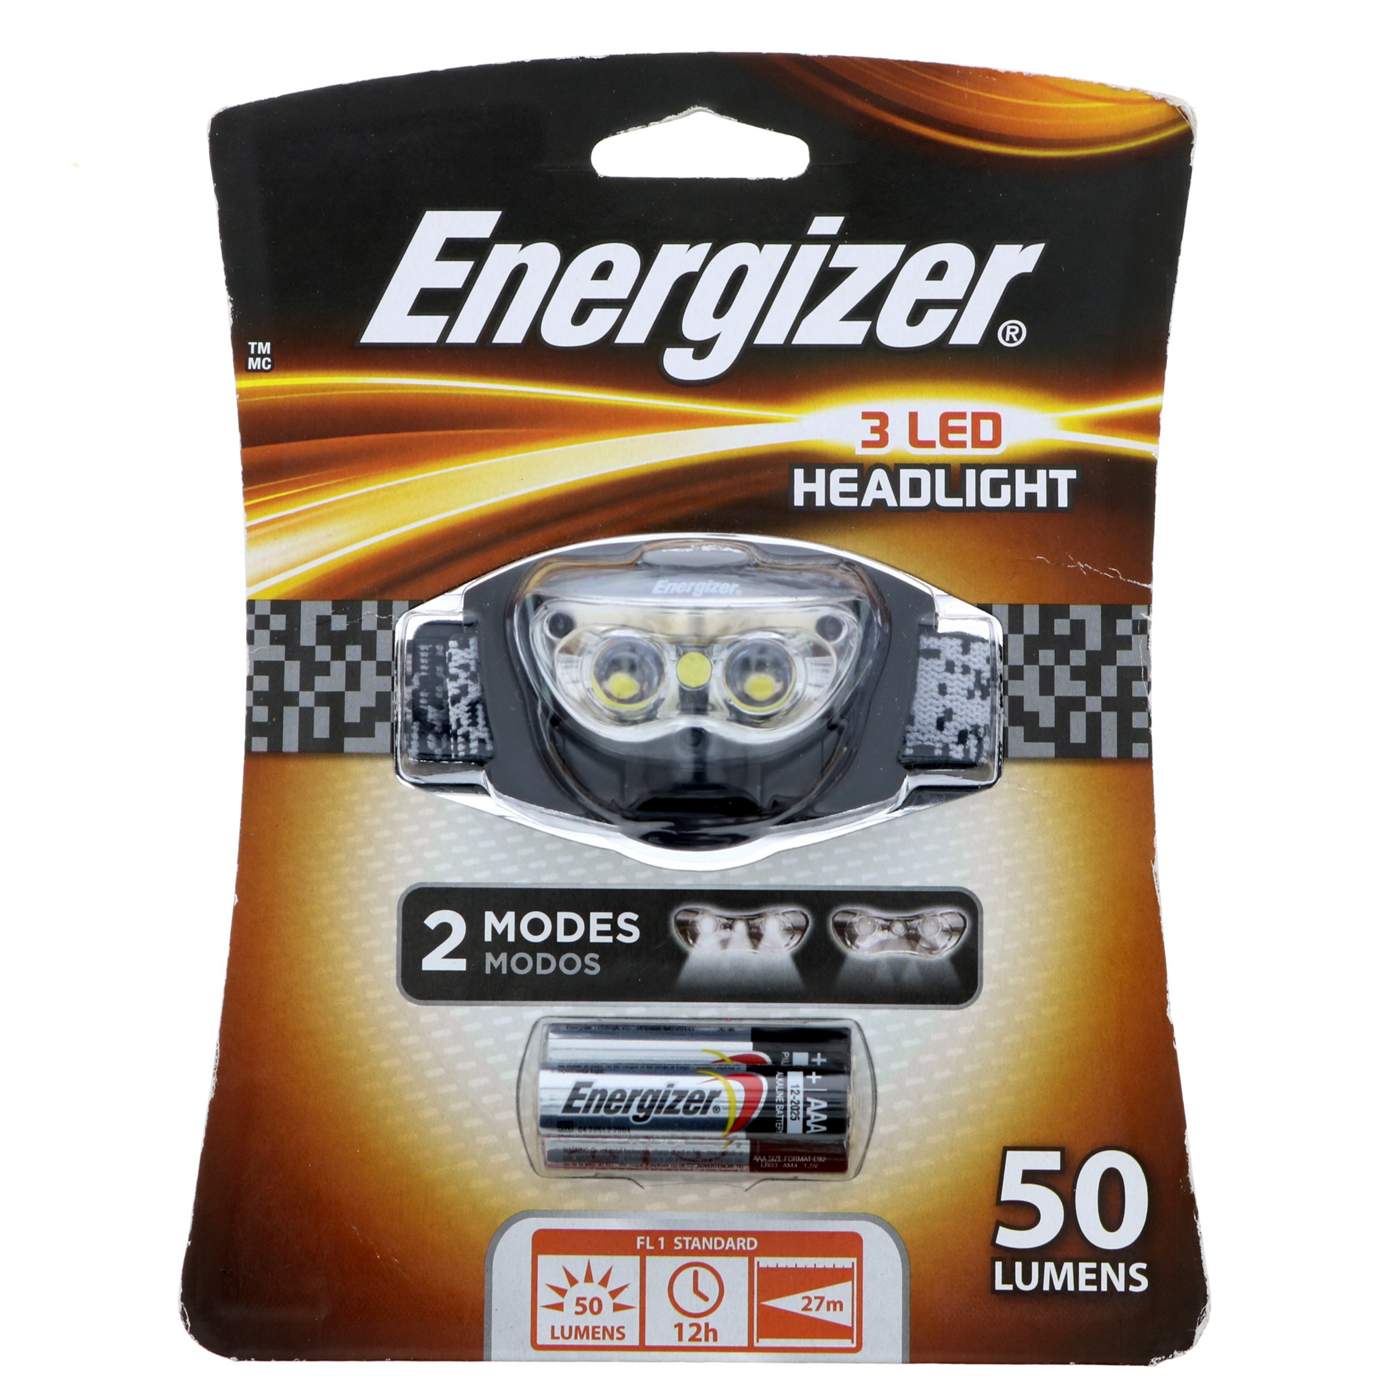 Energizer Industrial Pro 3 LED Headlight With 3 AAA Batteries; image 1 of 2